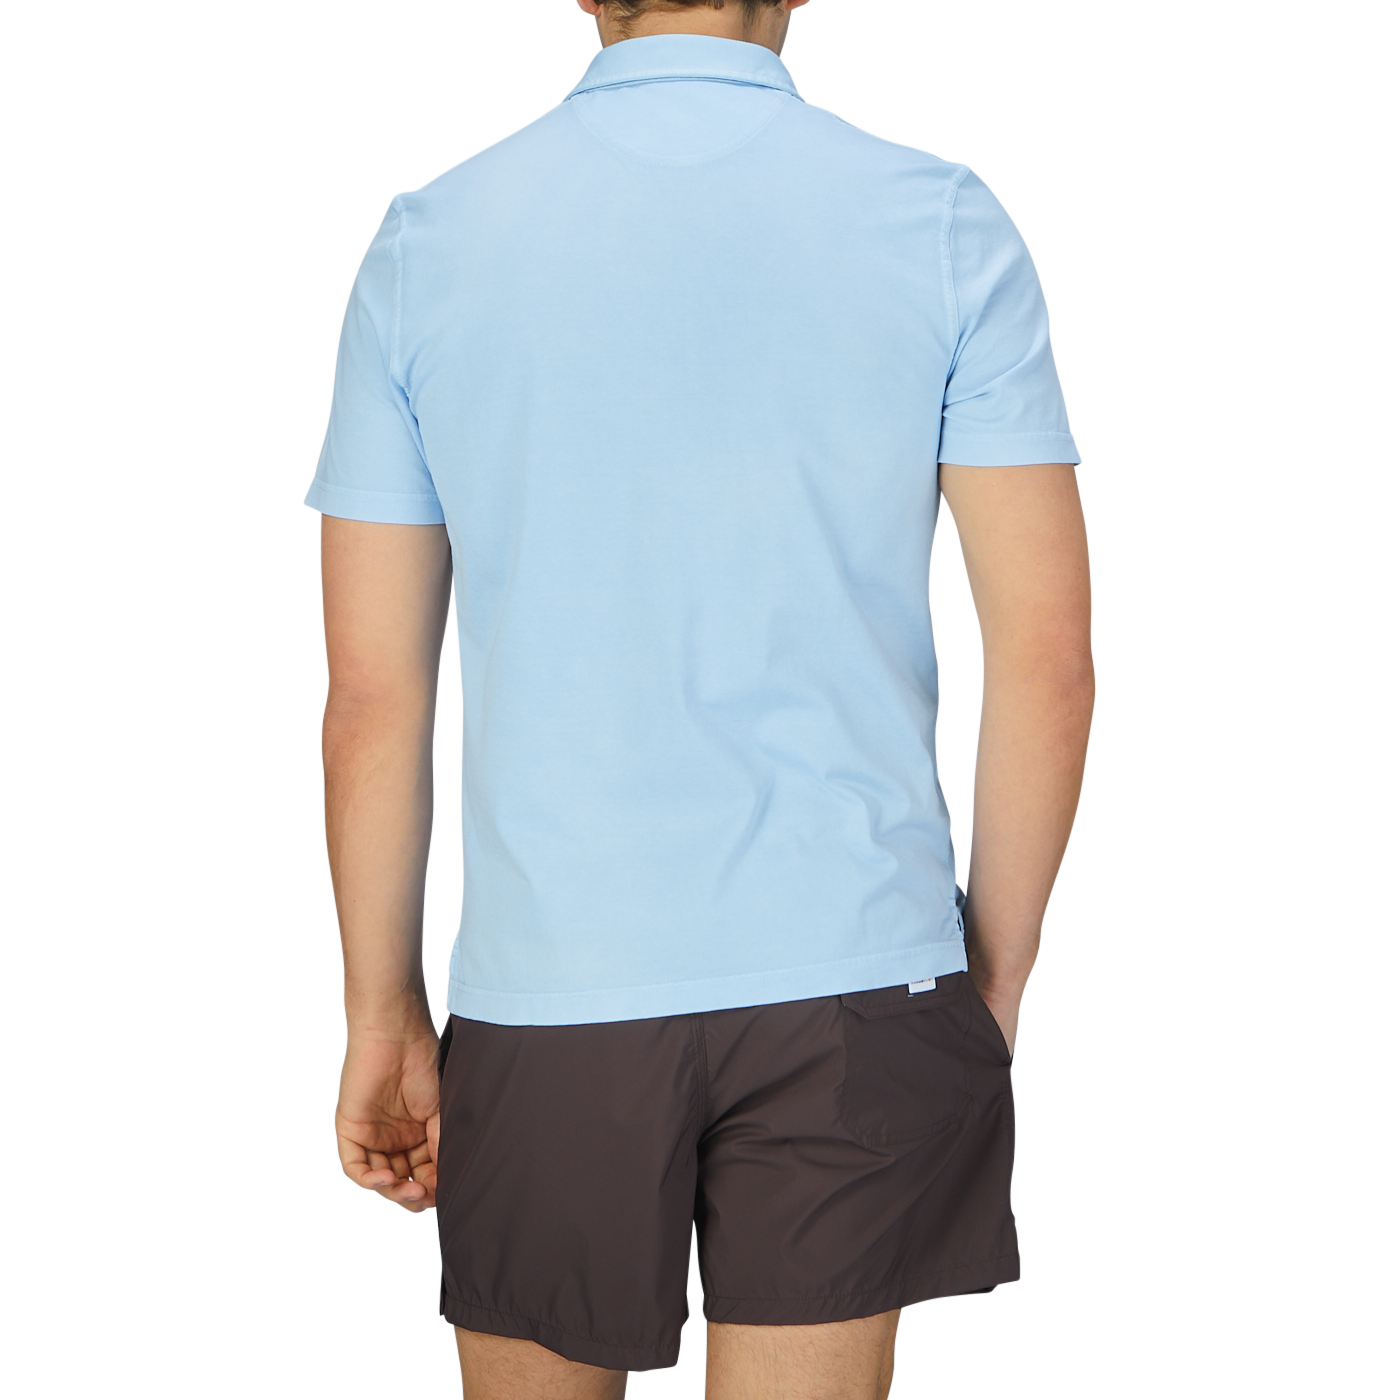 The back view of a man wearing a luxury Sky Blue Organic Cotton Polo Shirt by Fedeli.